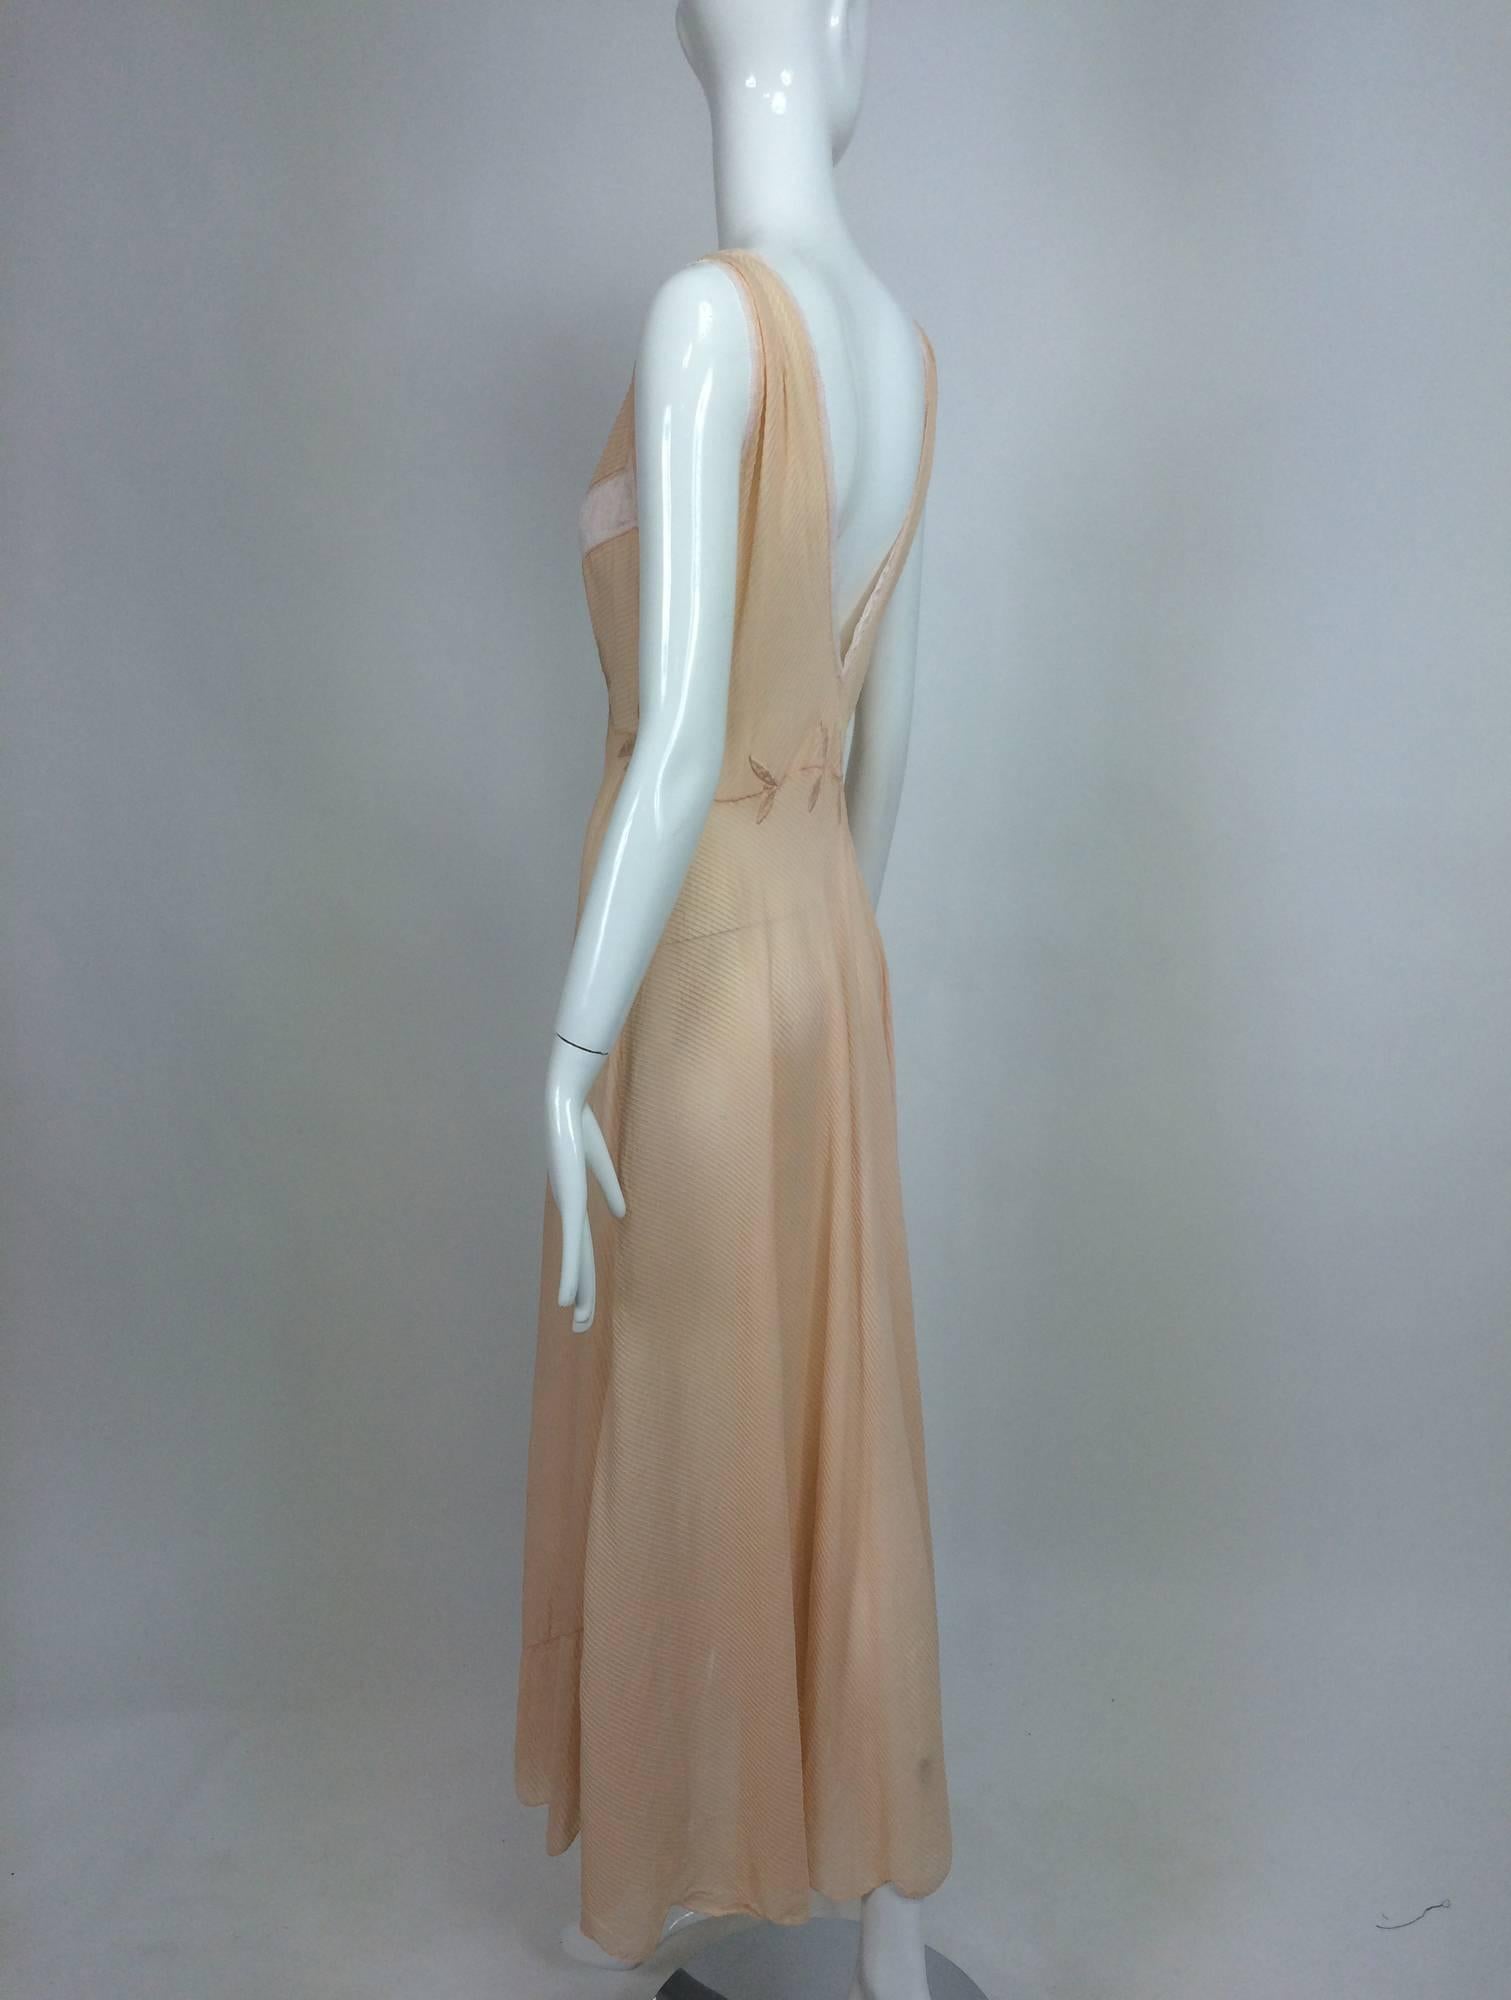 Women's Vintage hand made pleated silk chiffon bias cut appliqued night gown 1930s